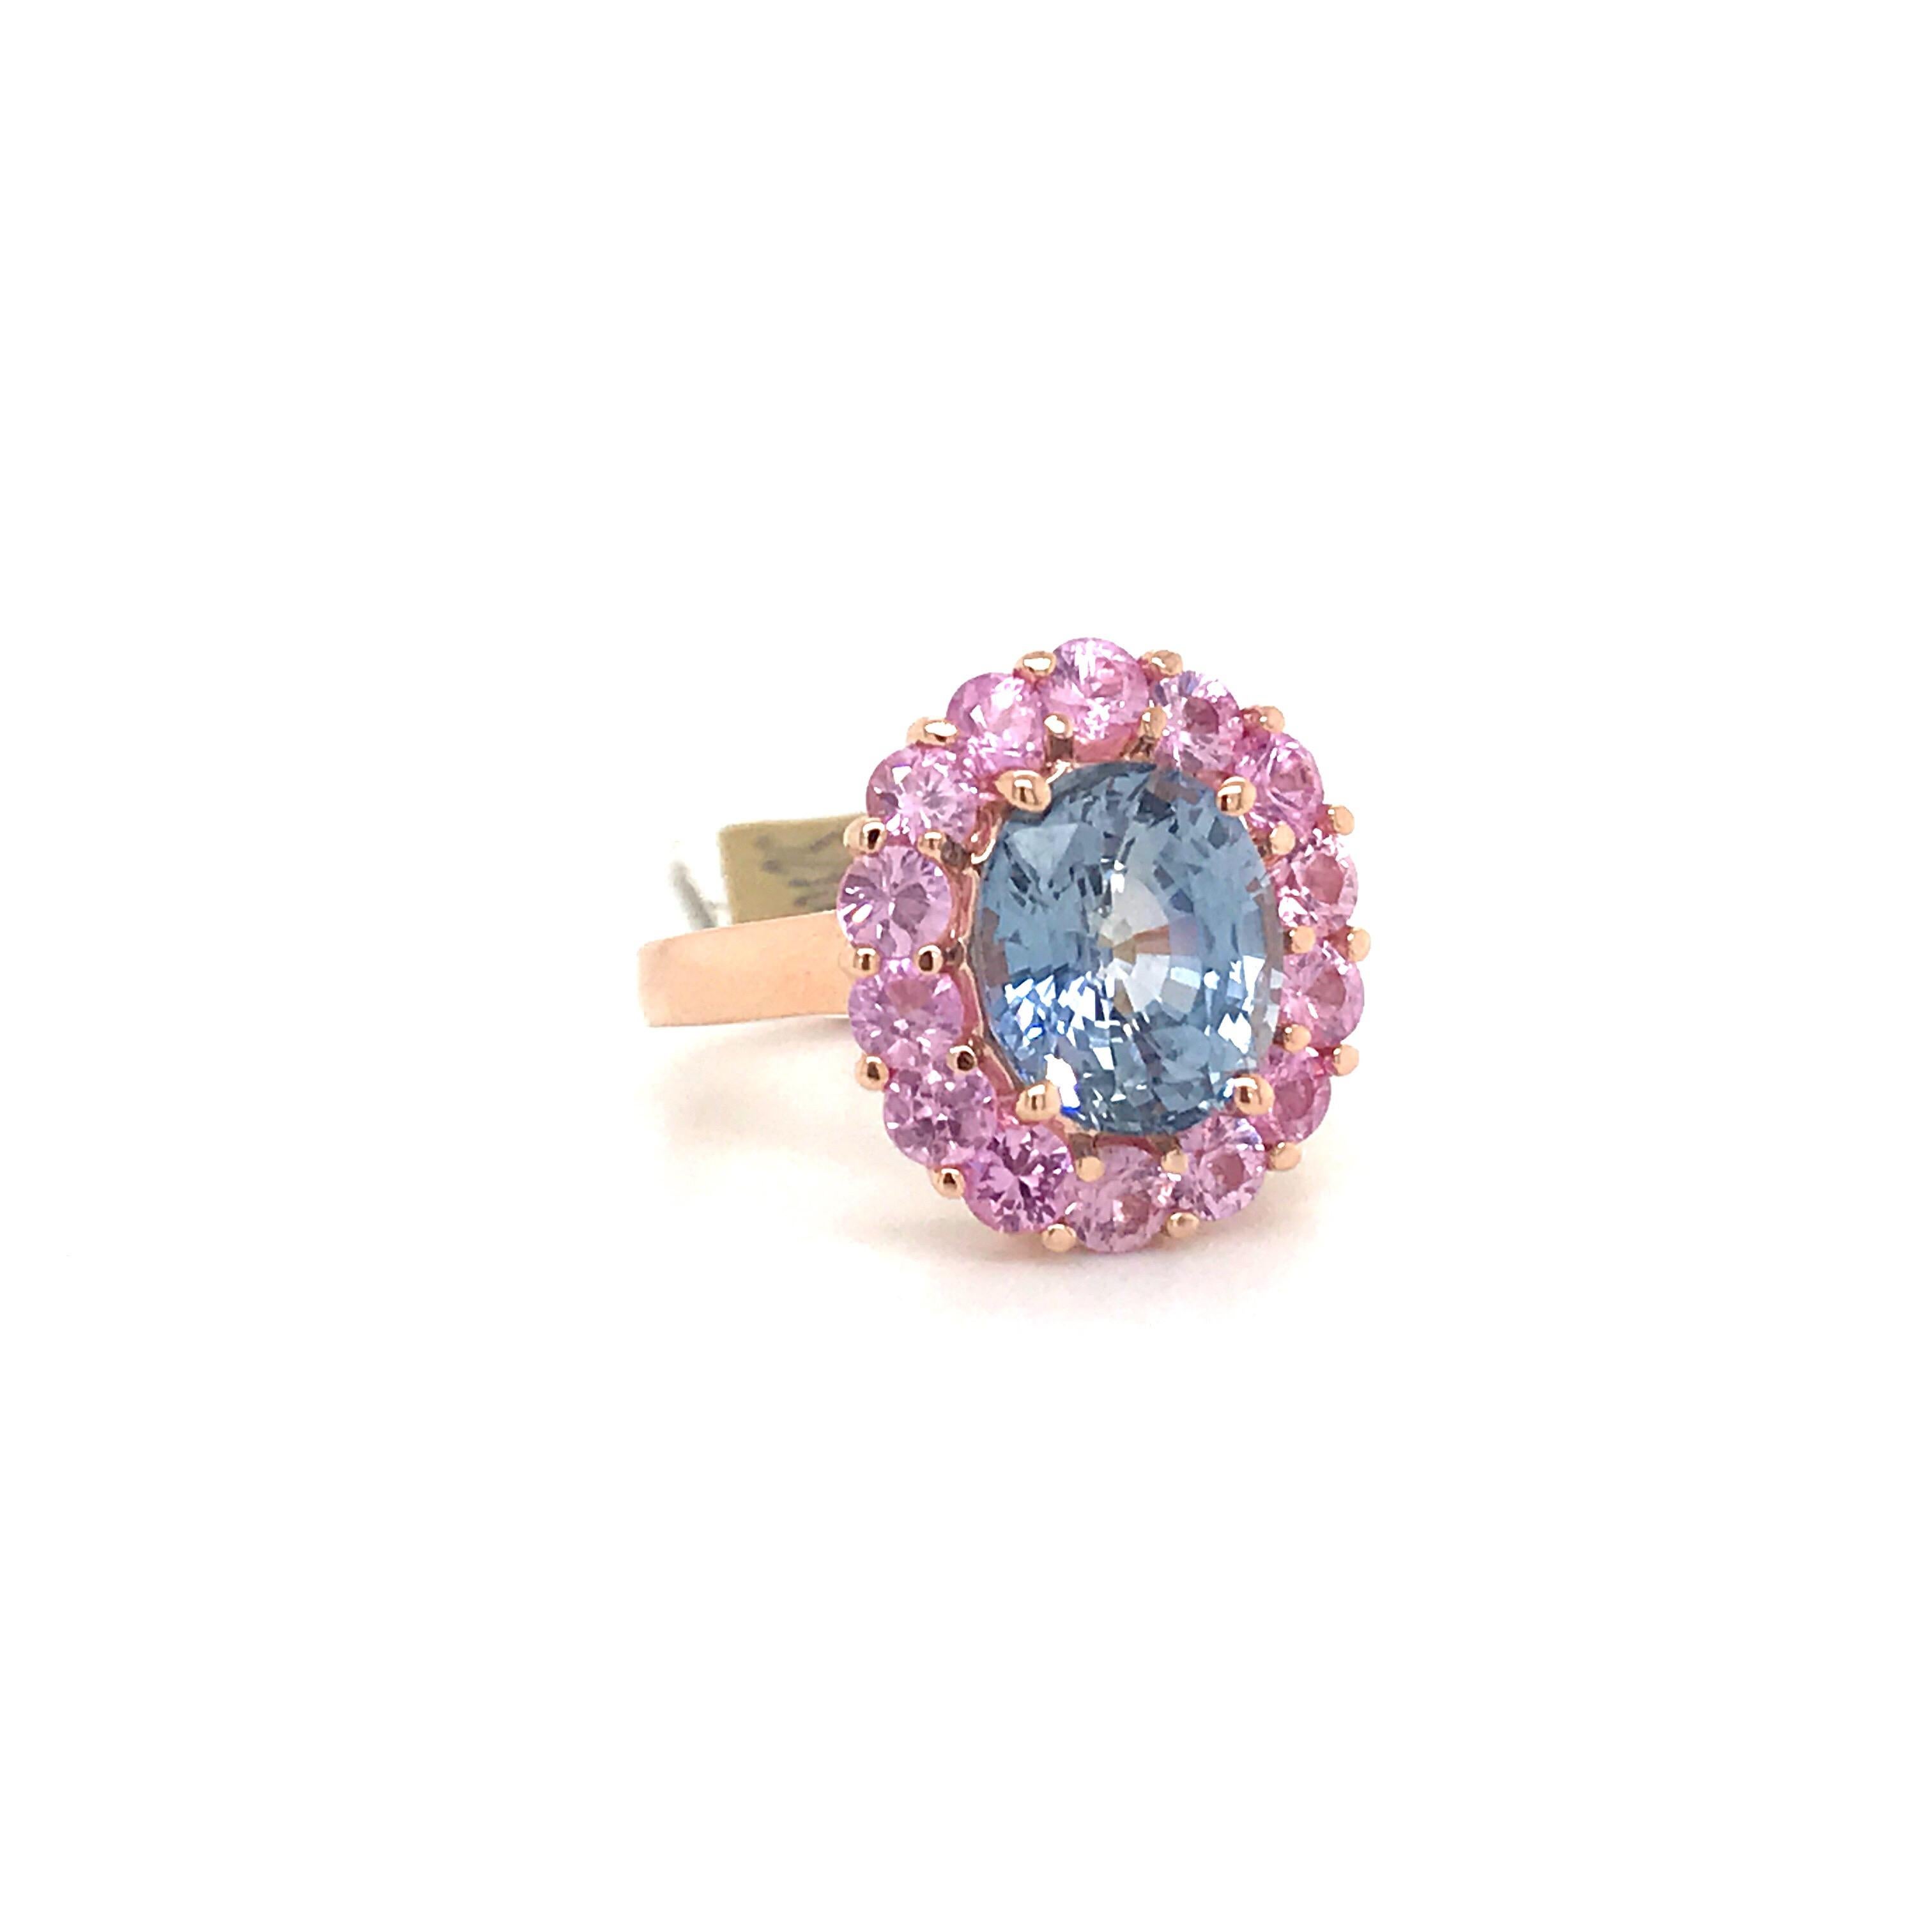 14K Yellow gold cluster cocktail ring featuring one oval cut blue sapphire weighing 4.58 carats flanked with round cut pink sapphires weighing 2.05 carats.

Ring is resizeable. 